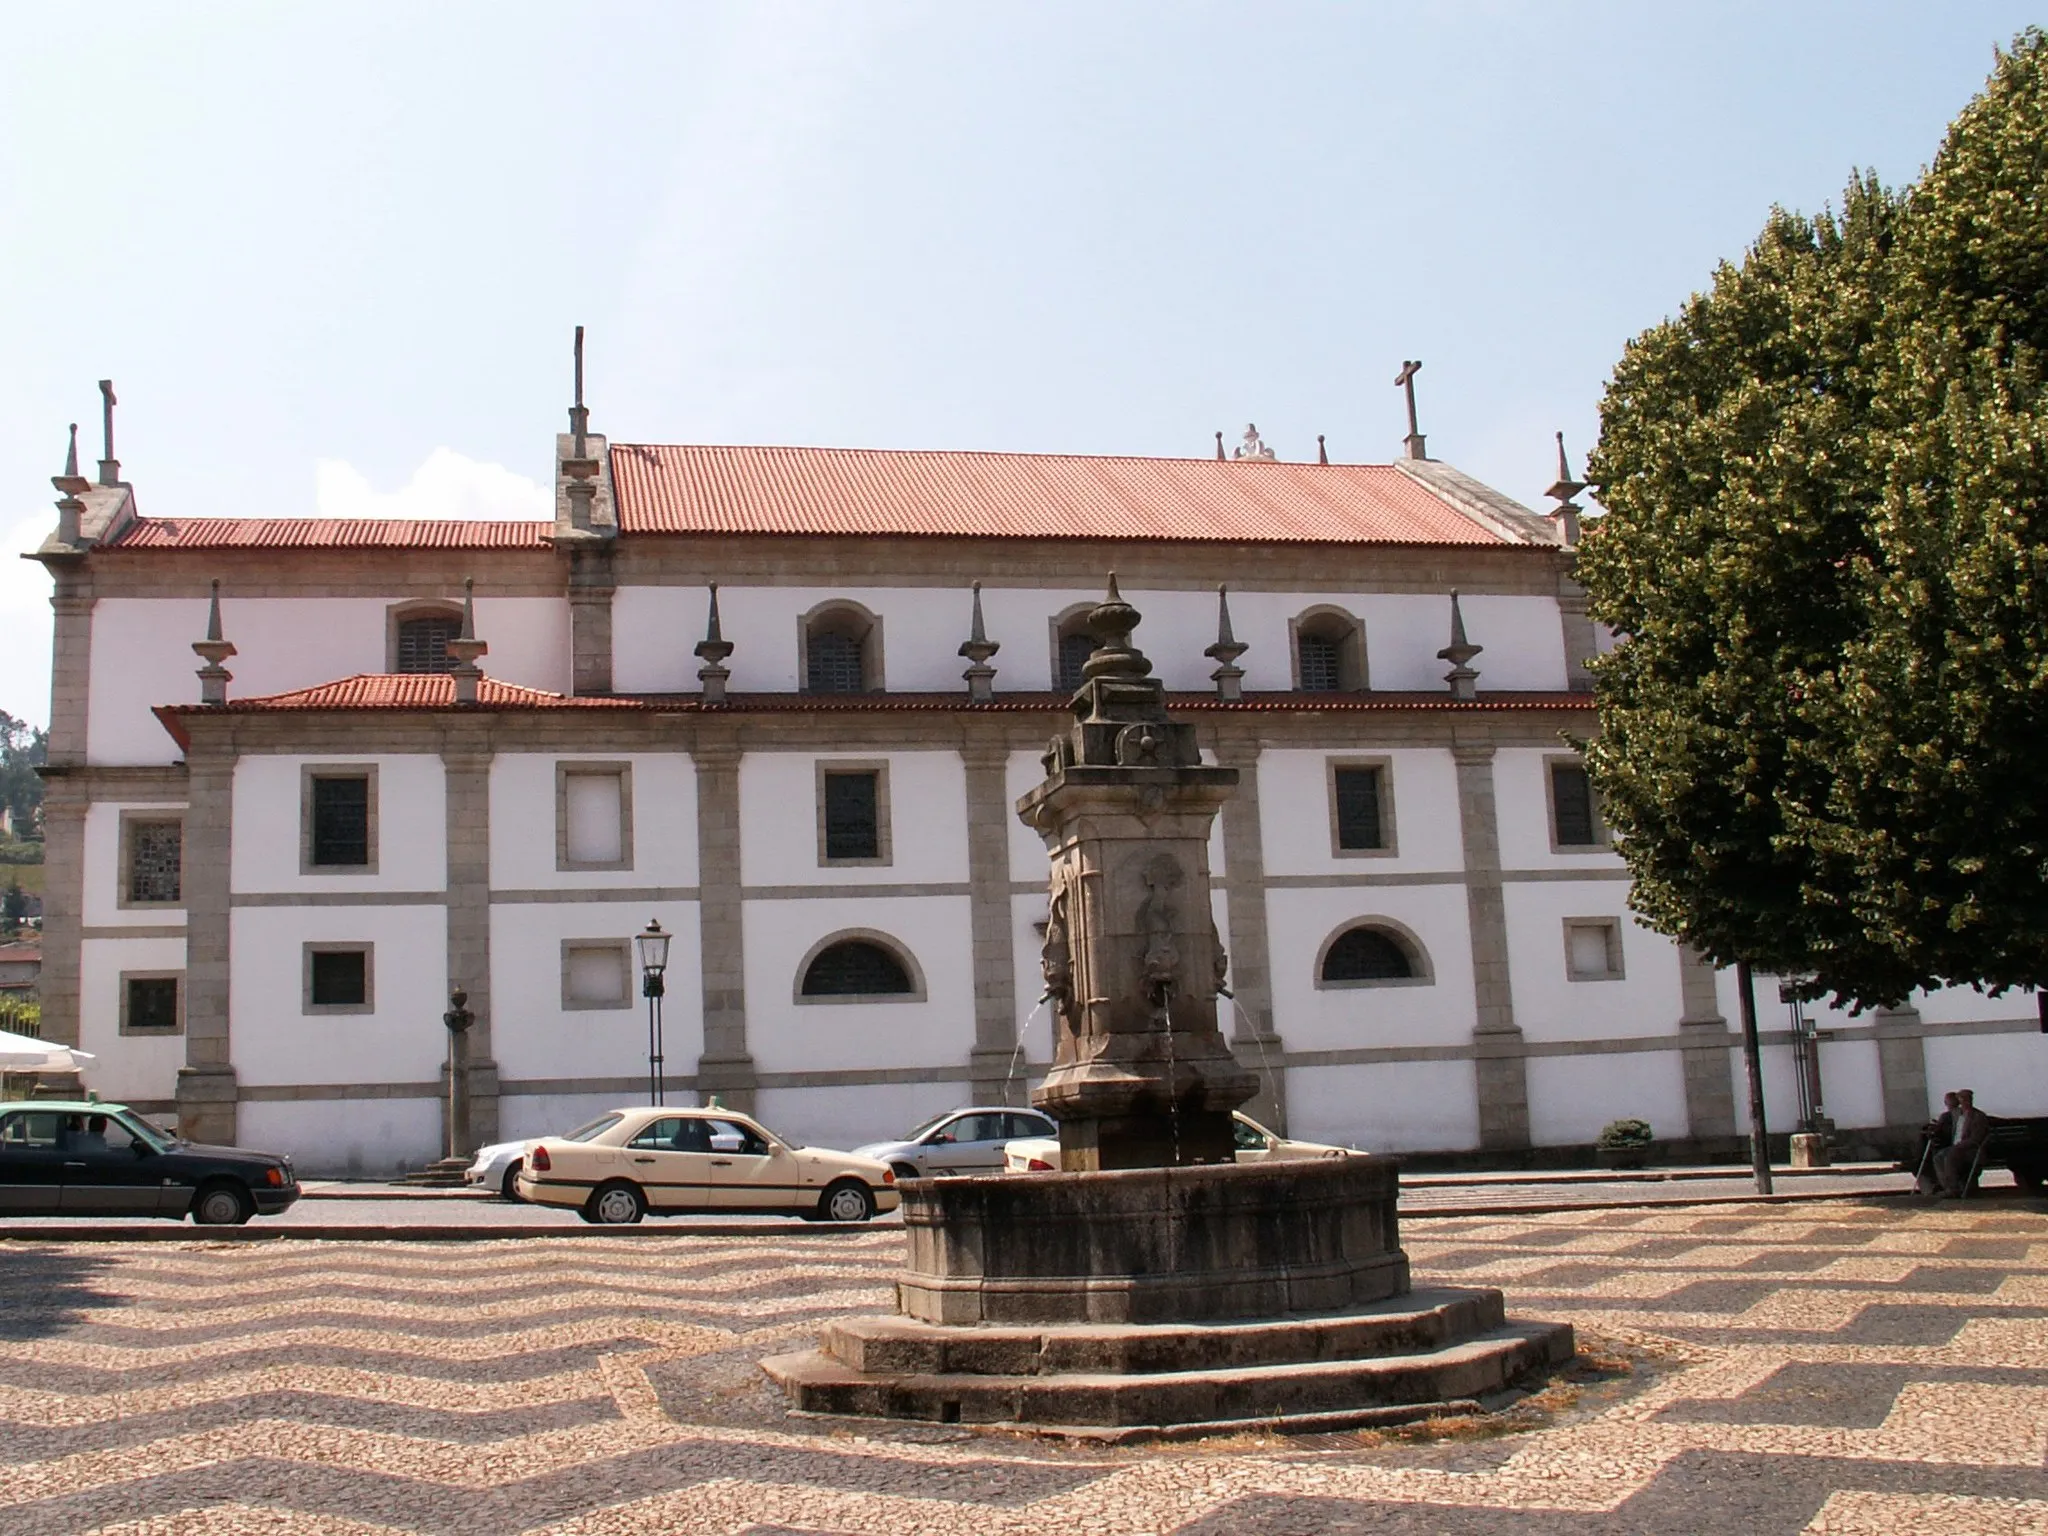 Photo showing: One side of the main square II